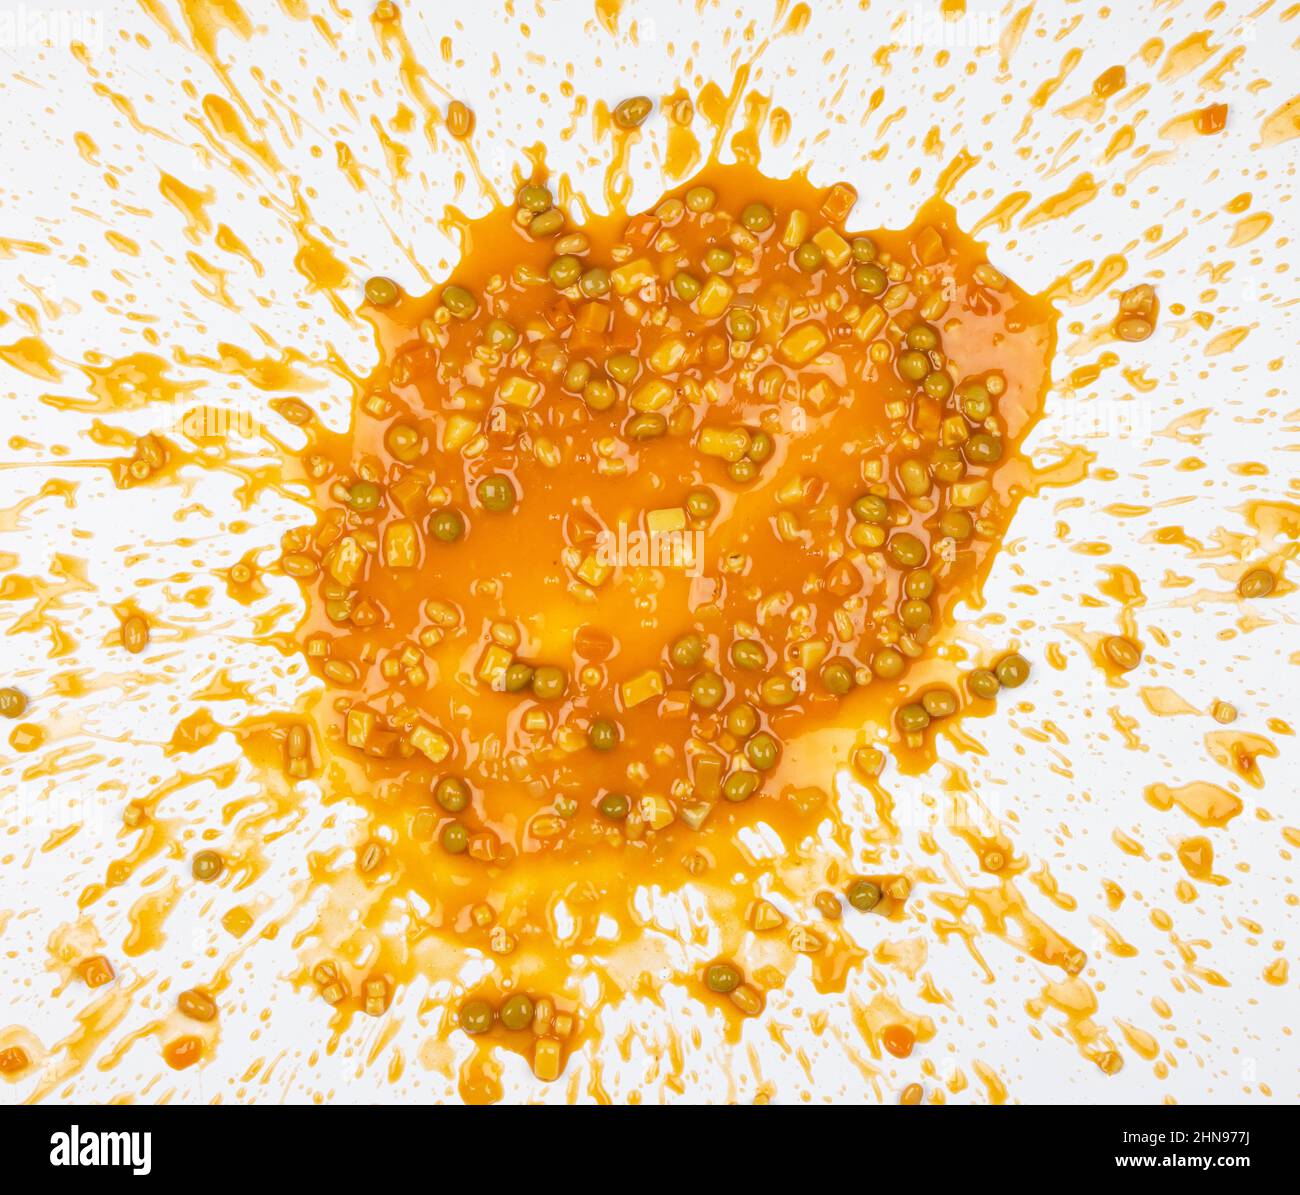 Vegetable soup splattered in a mess that looks like vomit, isolated on a white background Stock Photo